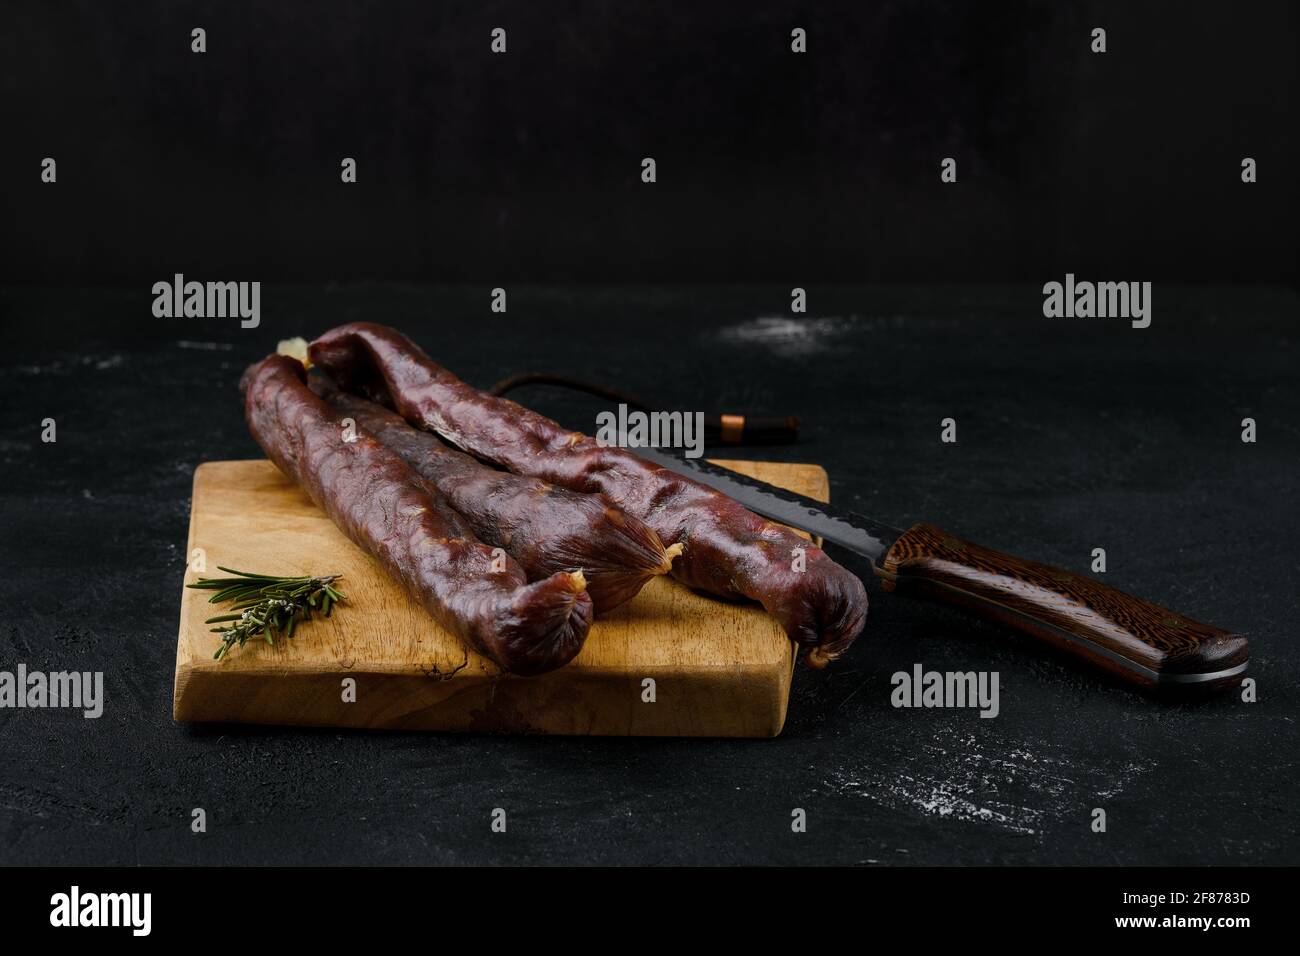 Dry cured beef sausage on cutting board Stock Photo